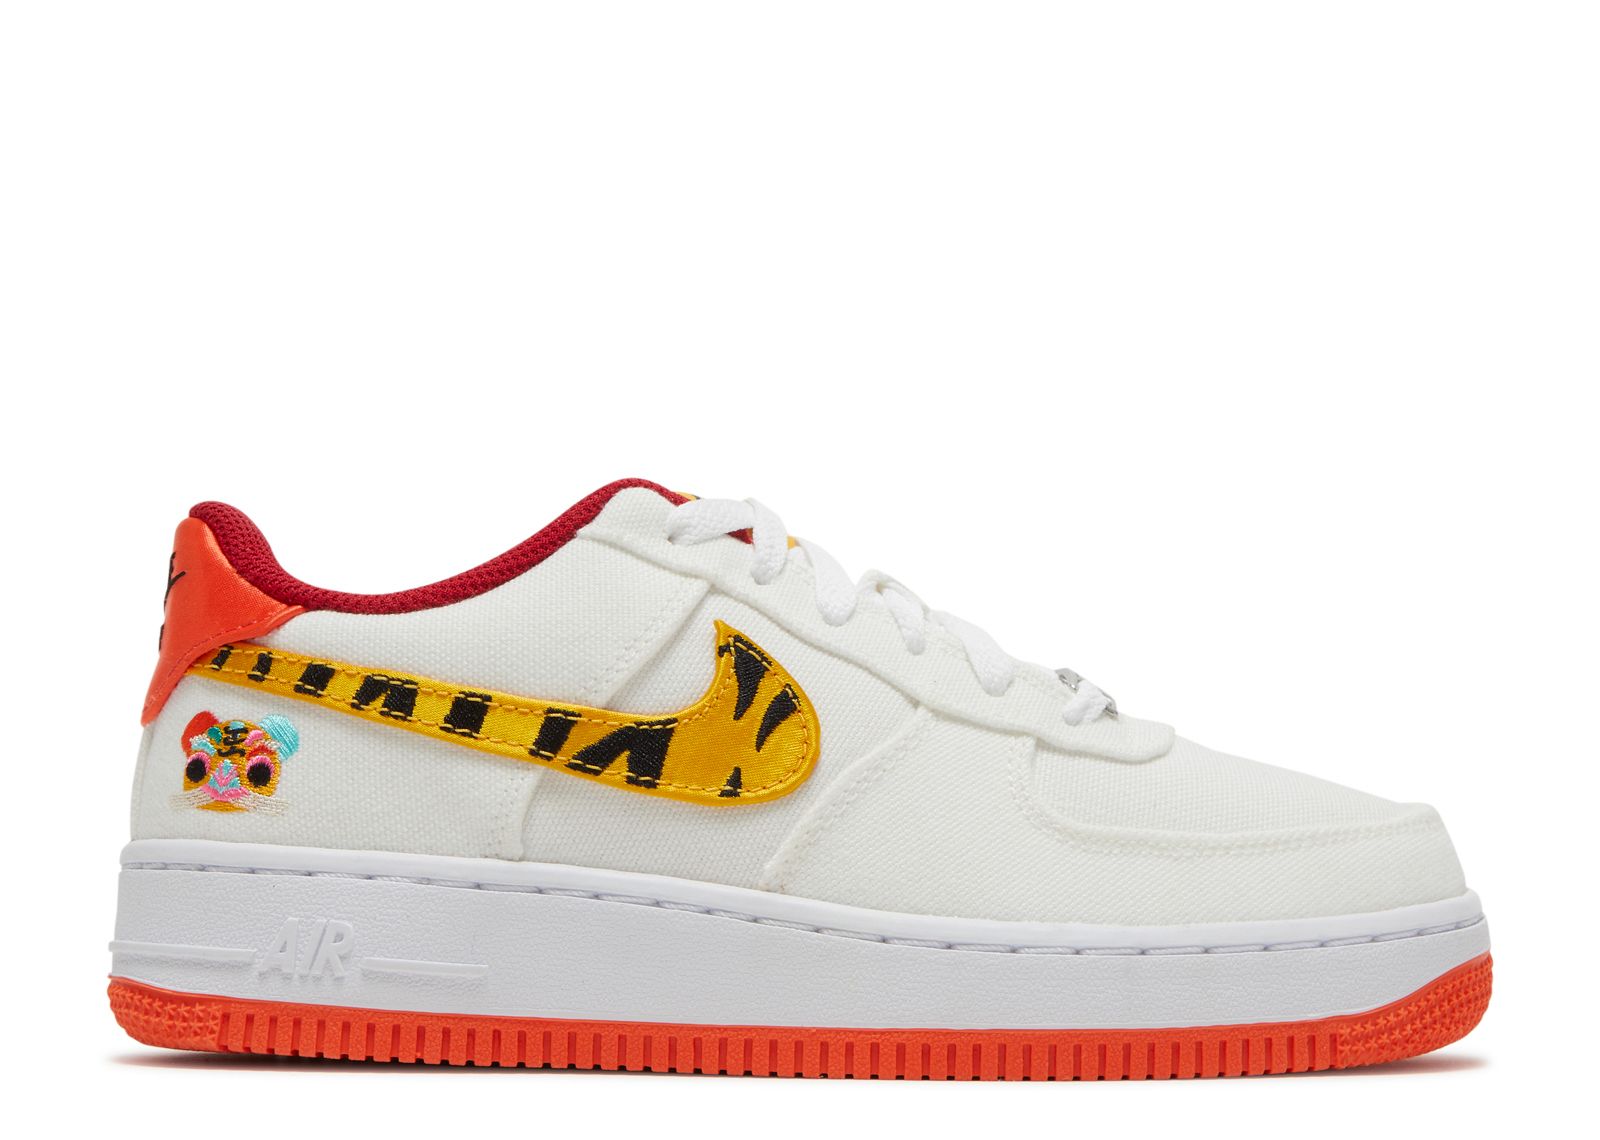 Кроссовки Nike Air Force 1 '07 Lv8 Gs 'Year Of The Tiger', белый